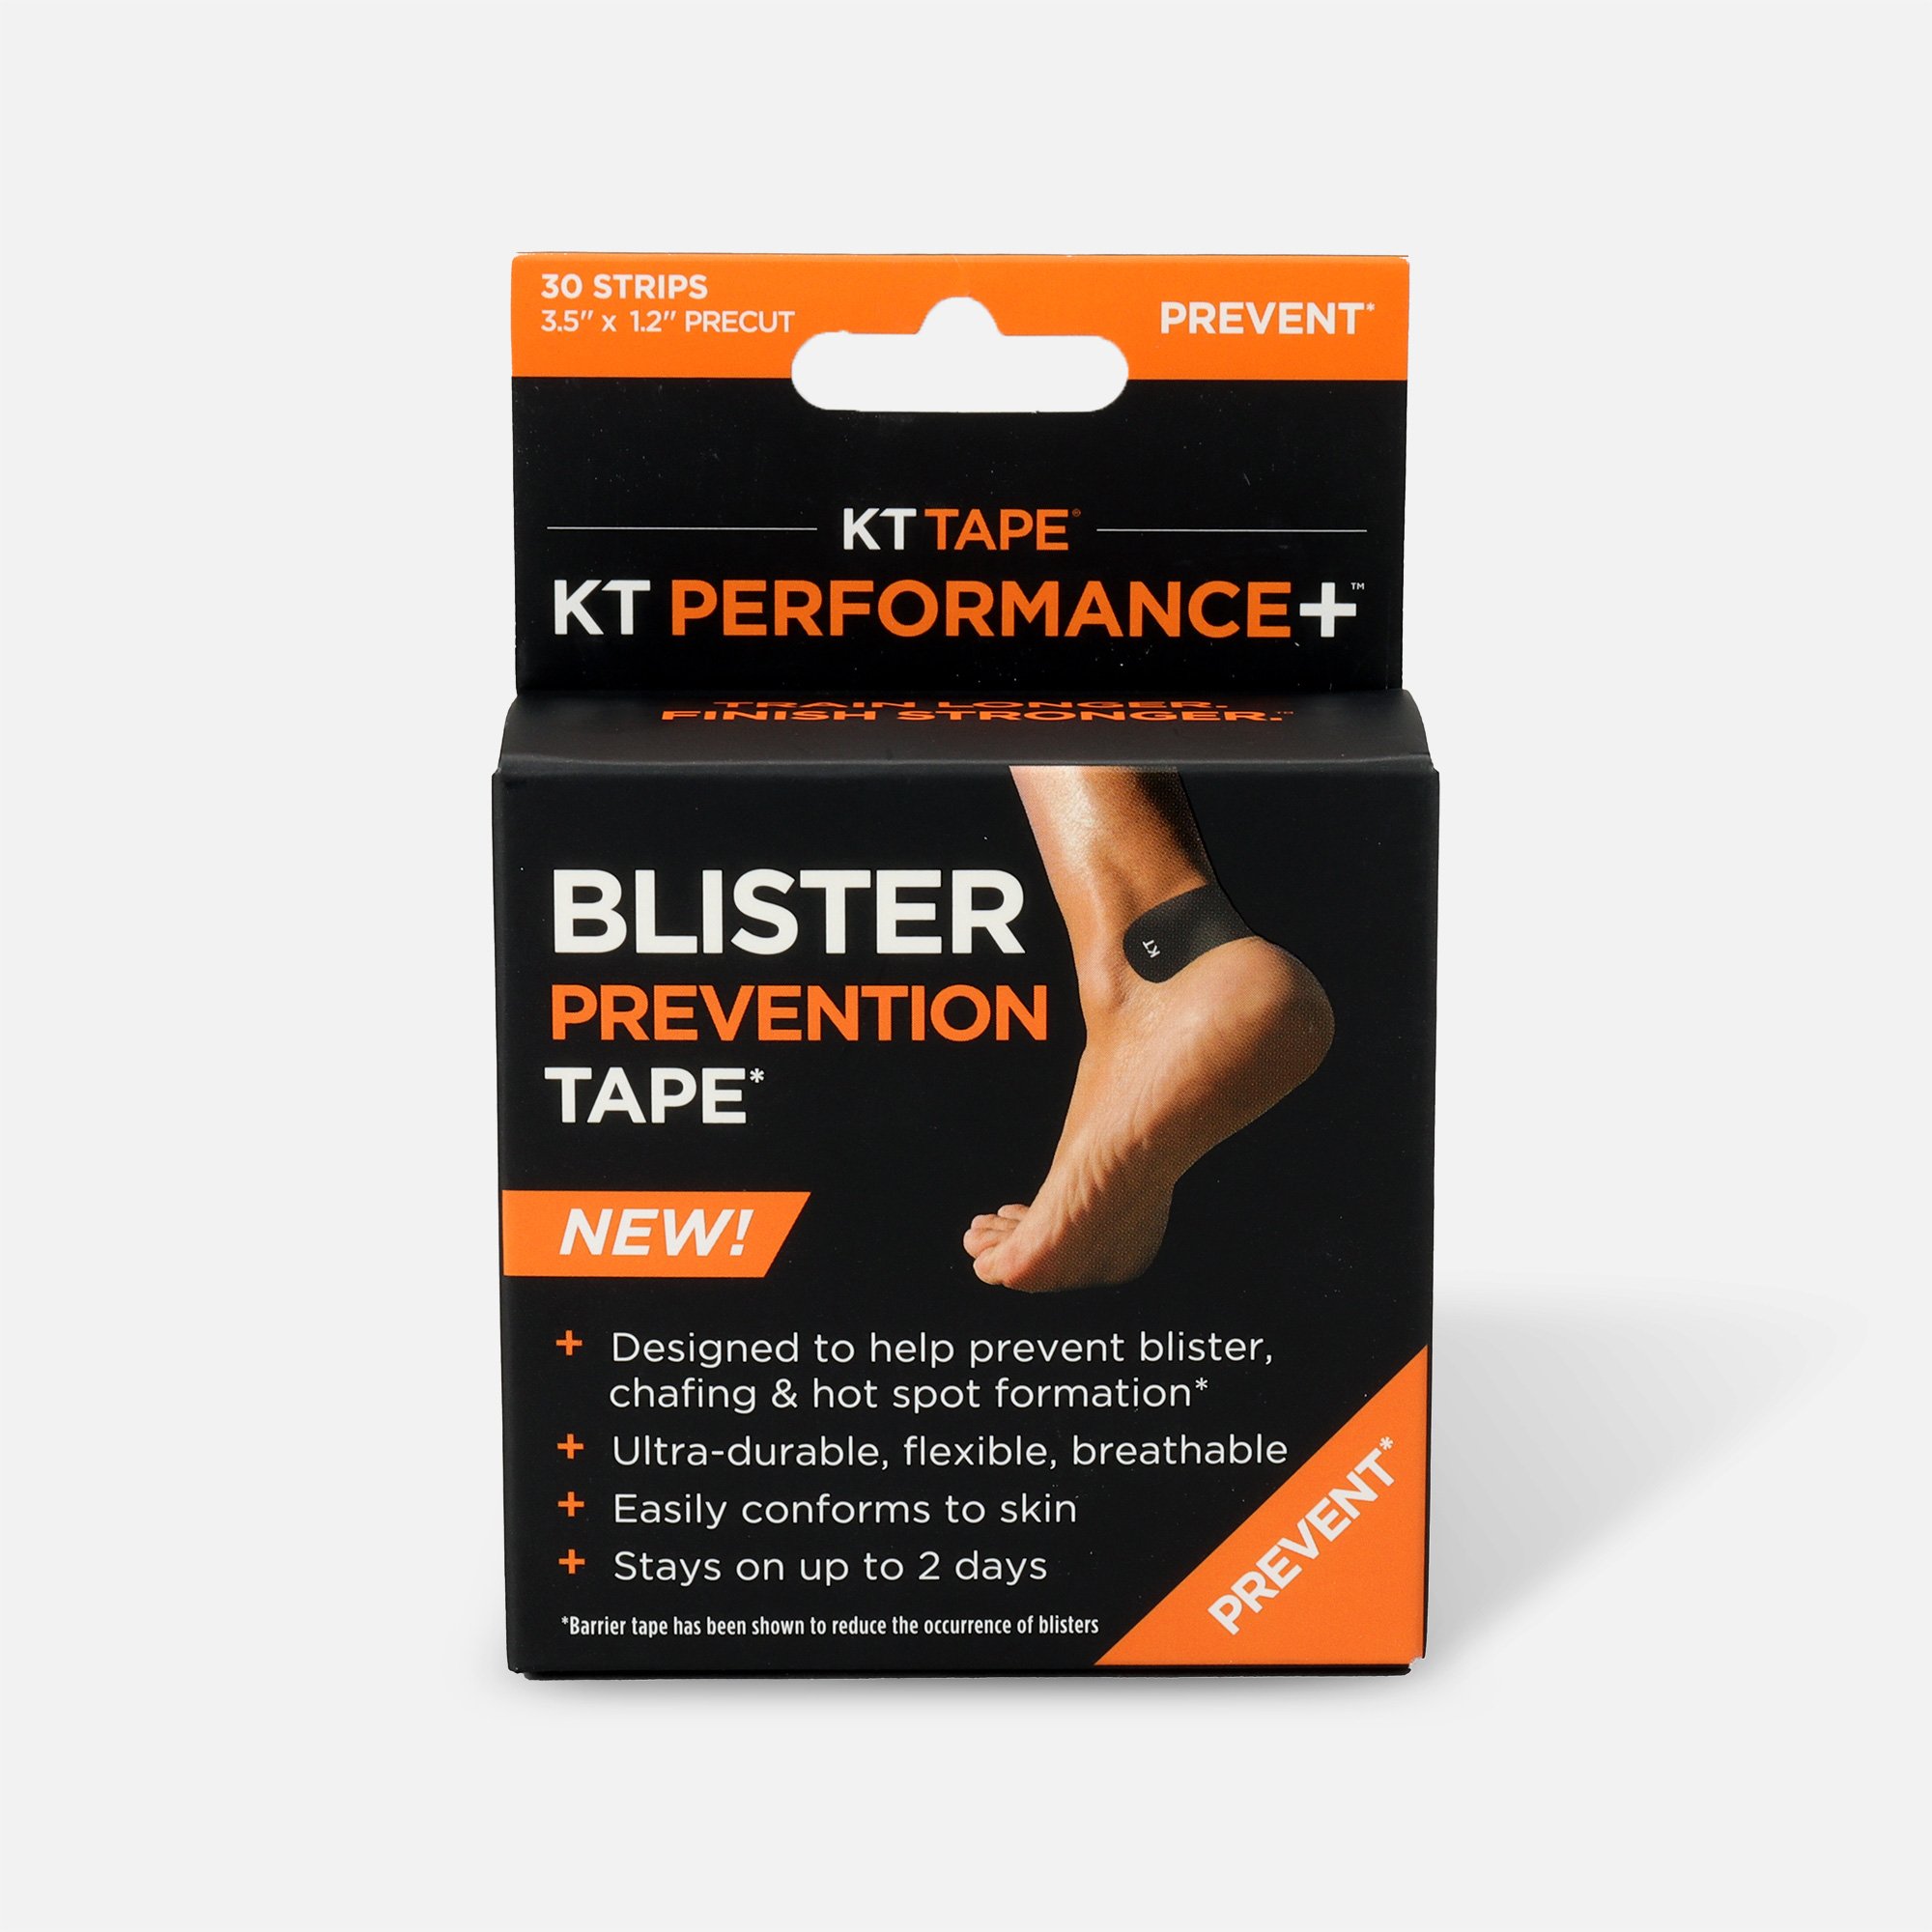 HSA Eligible | KT Tape Performance+™ Blister Prevention Patch, 30 ct